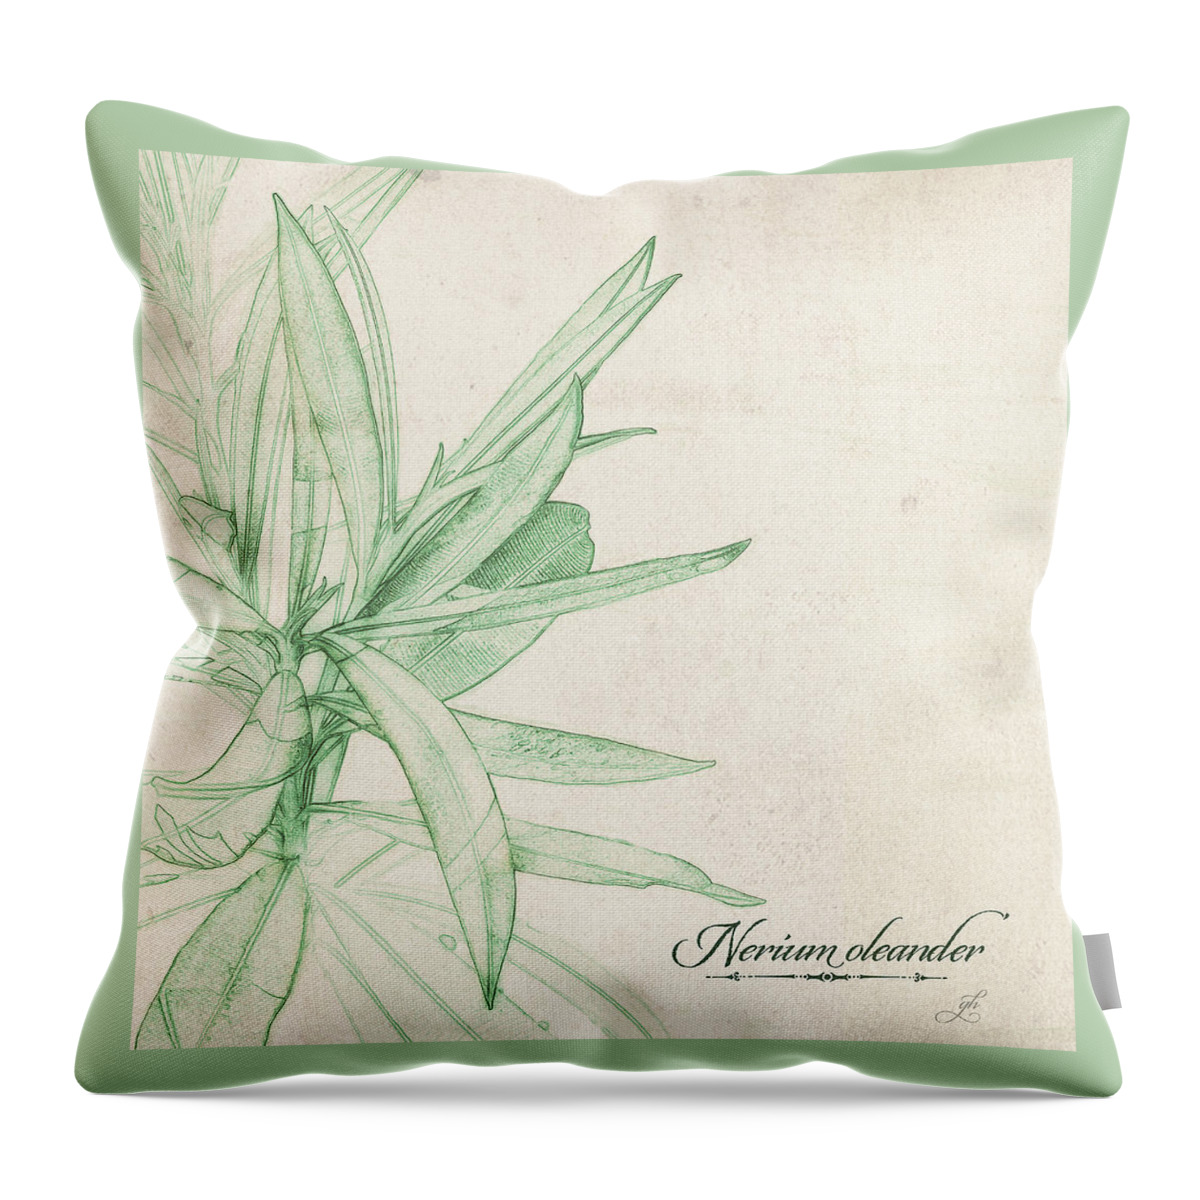 Botanical Sketch Throw Pillow featuring the digital art Nerium oleander by Gina Harrison